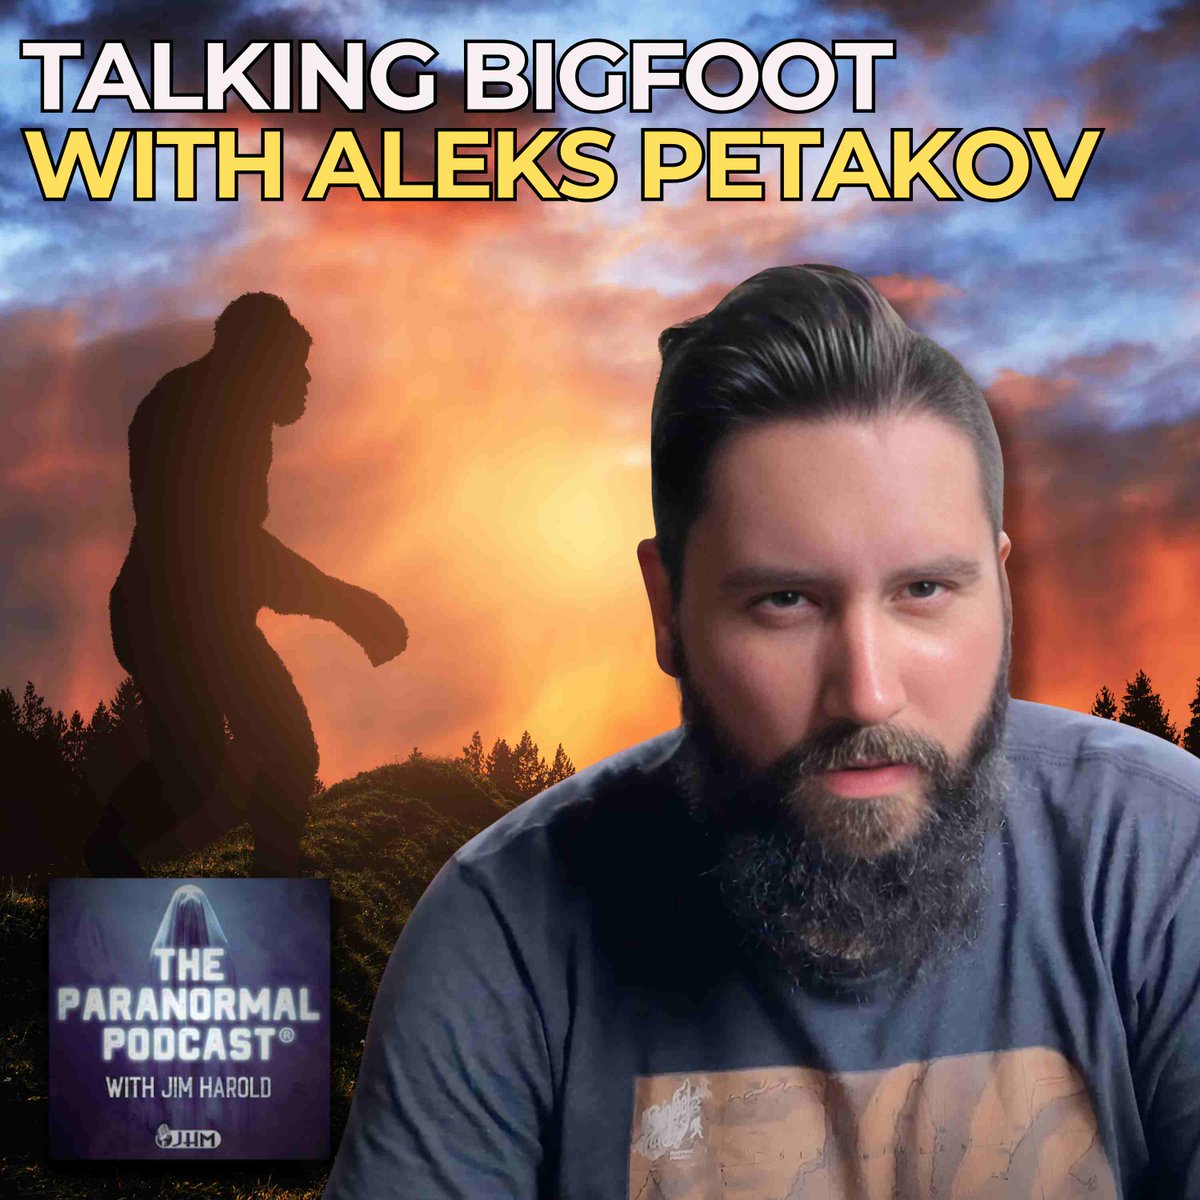 Back in action and just posted a Paranormal Podcast episode with the fascinating Aleks Petakov of Small Town Monsters. We talk Bigfoot & more mysterious stuff. Check it out on Apple Podcasts, Spotify, YouTube or wherever you get your podcasts!